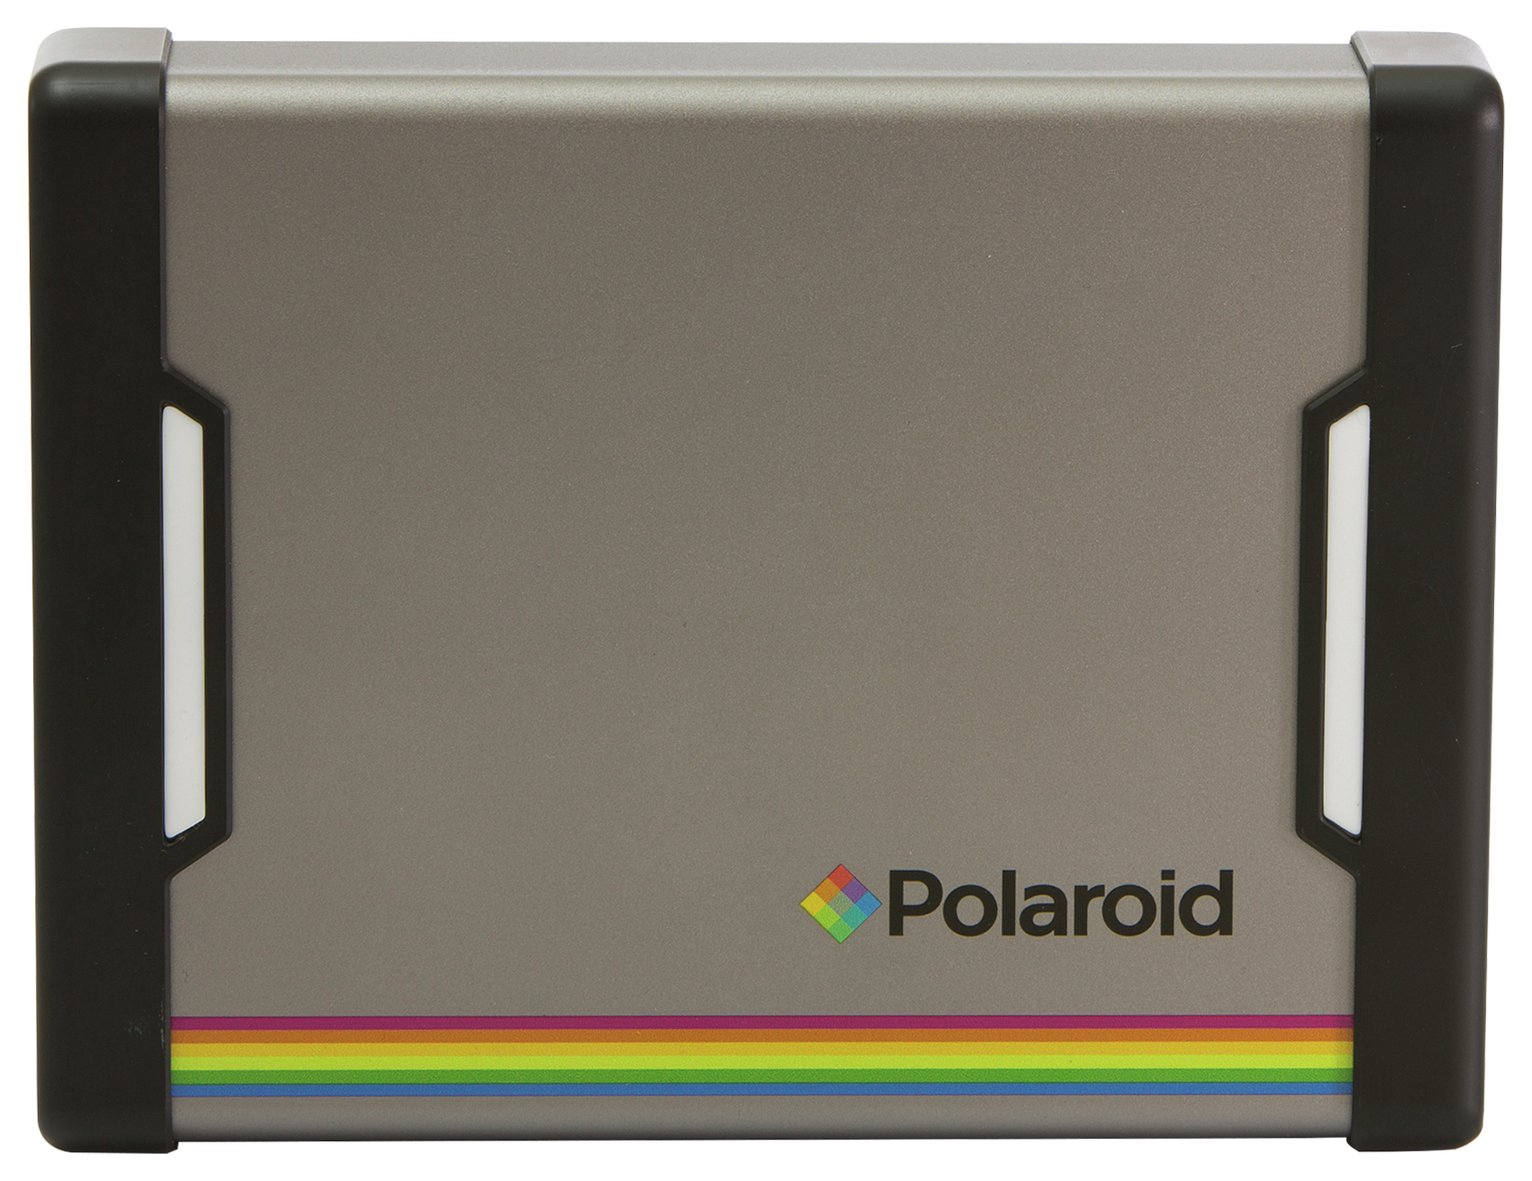 Polaroid PS300 289.5W Portable Power Supply Review